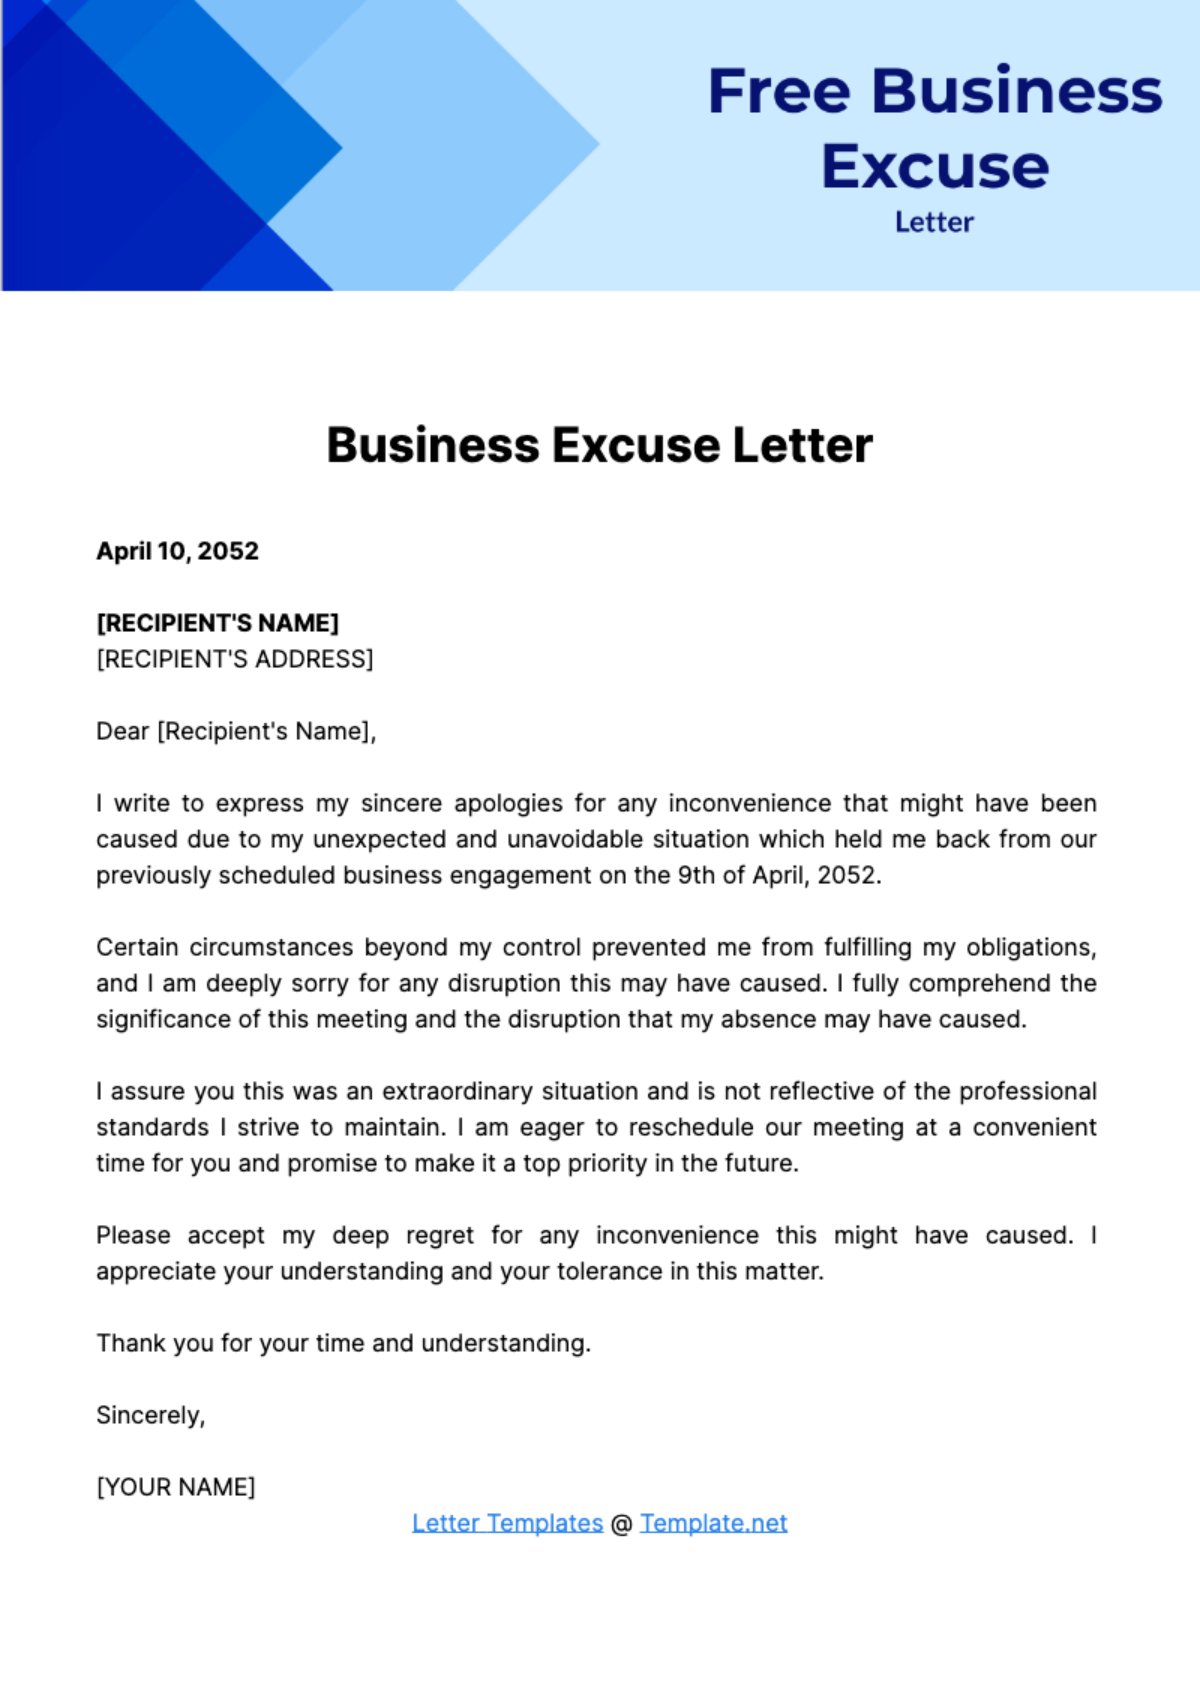 Business Excuse Letter Template